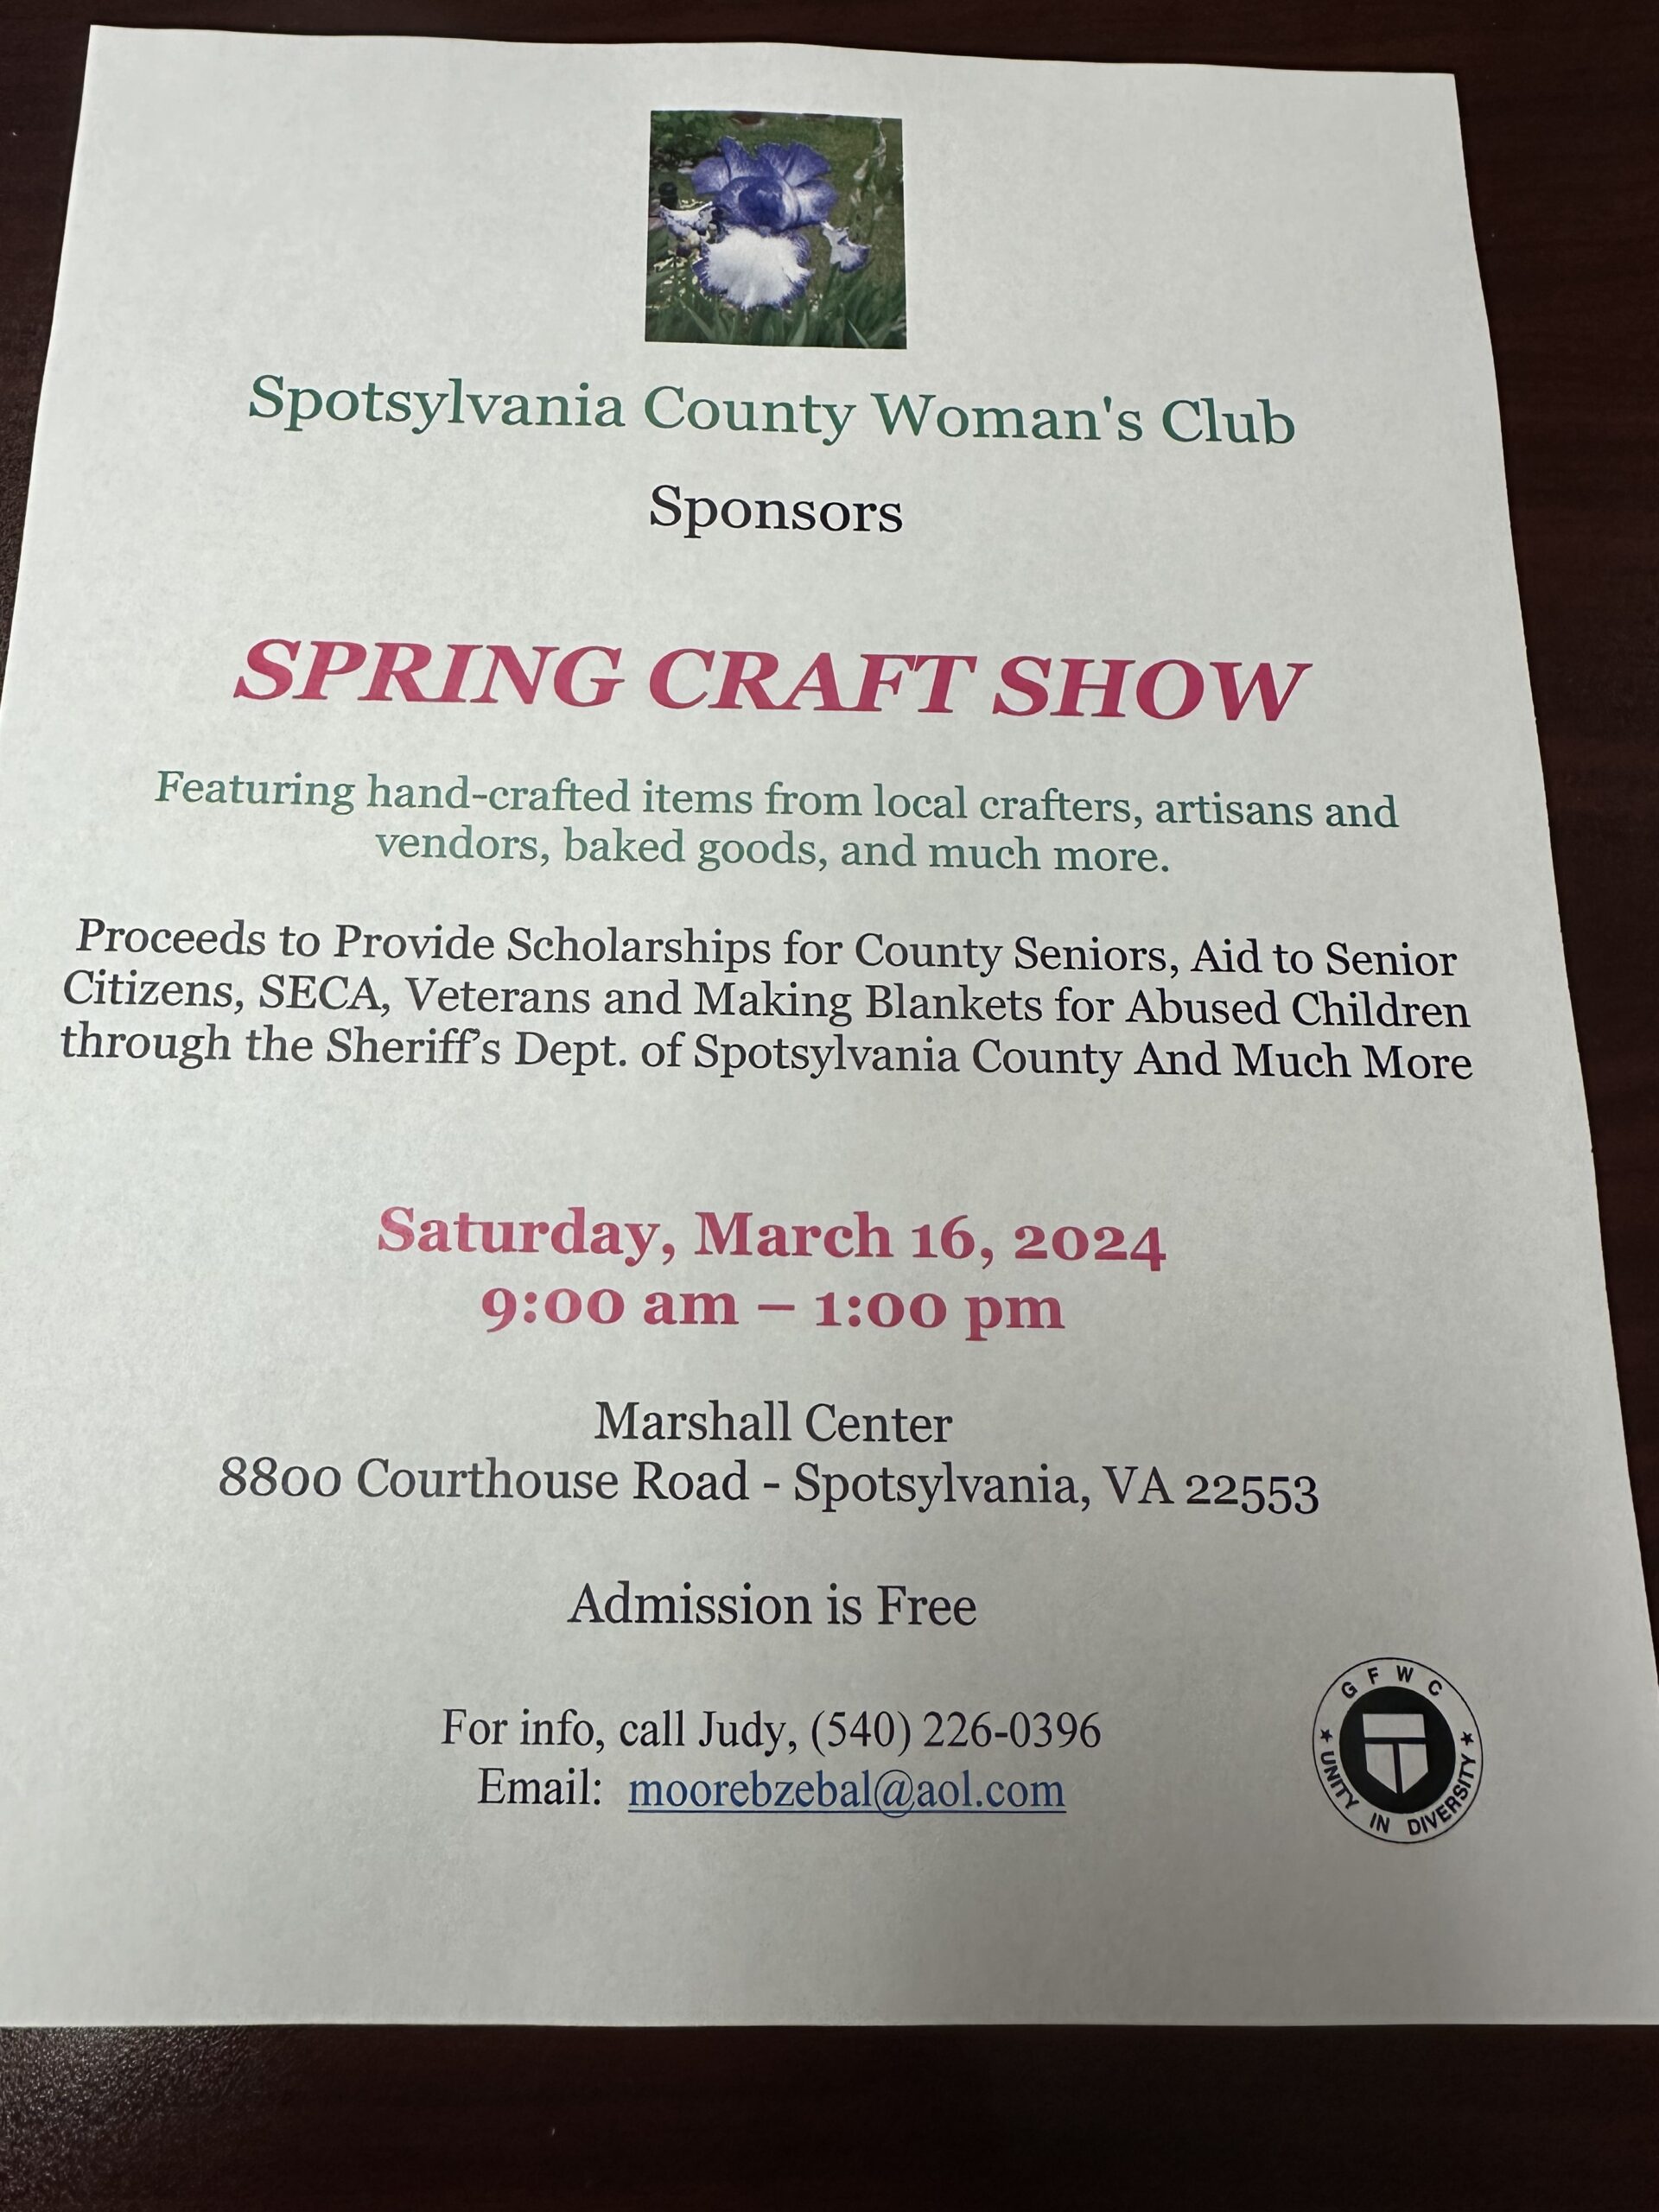 <h1 class="tribe-events-single-event-title">Spring Craft Show</h1>